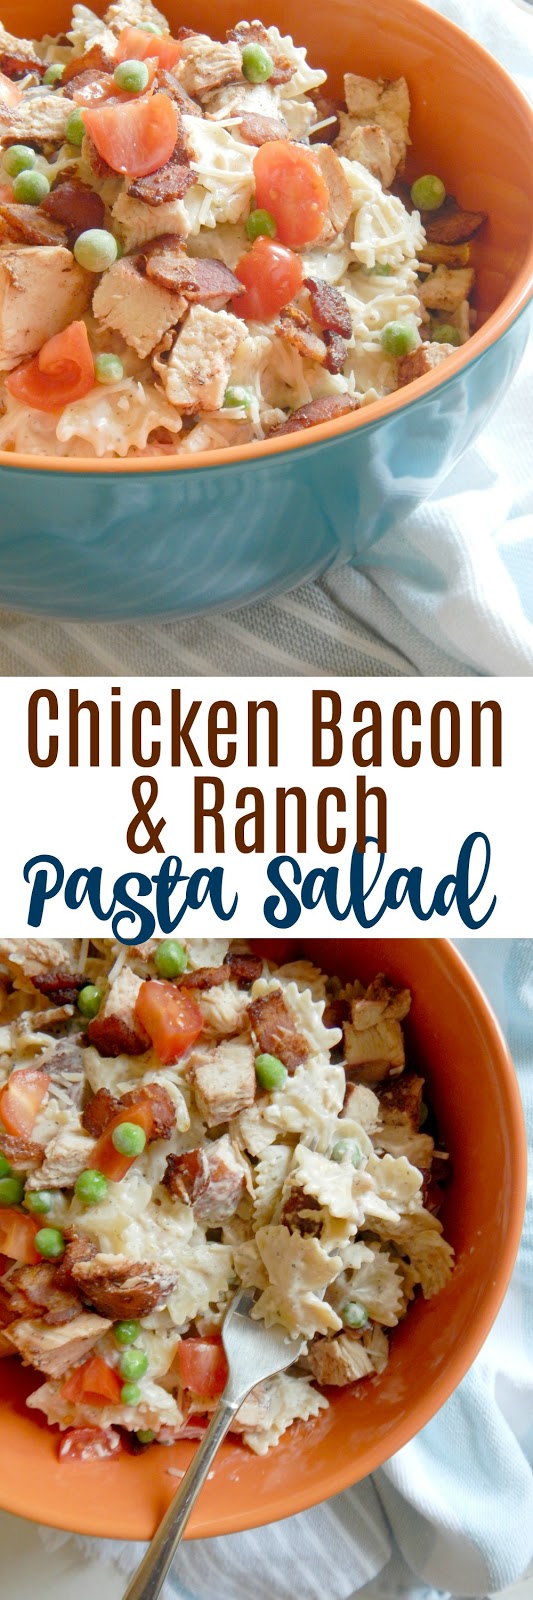 Chicken Bacon and Ranch Pasta Salad...a creamy, homemade dressing is tossed with grilled chicken, bacon, pasta, veggies and cheese!  Such a great salad for entertaining, grilling out, a fun side dish or even the main meal! (sweetandsavoryfood.com)